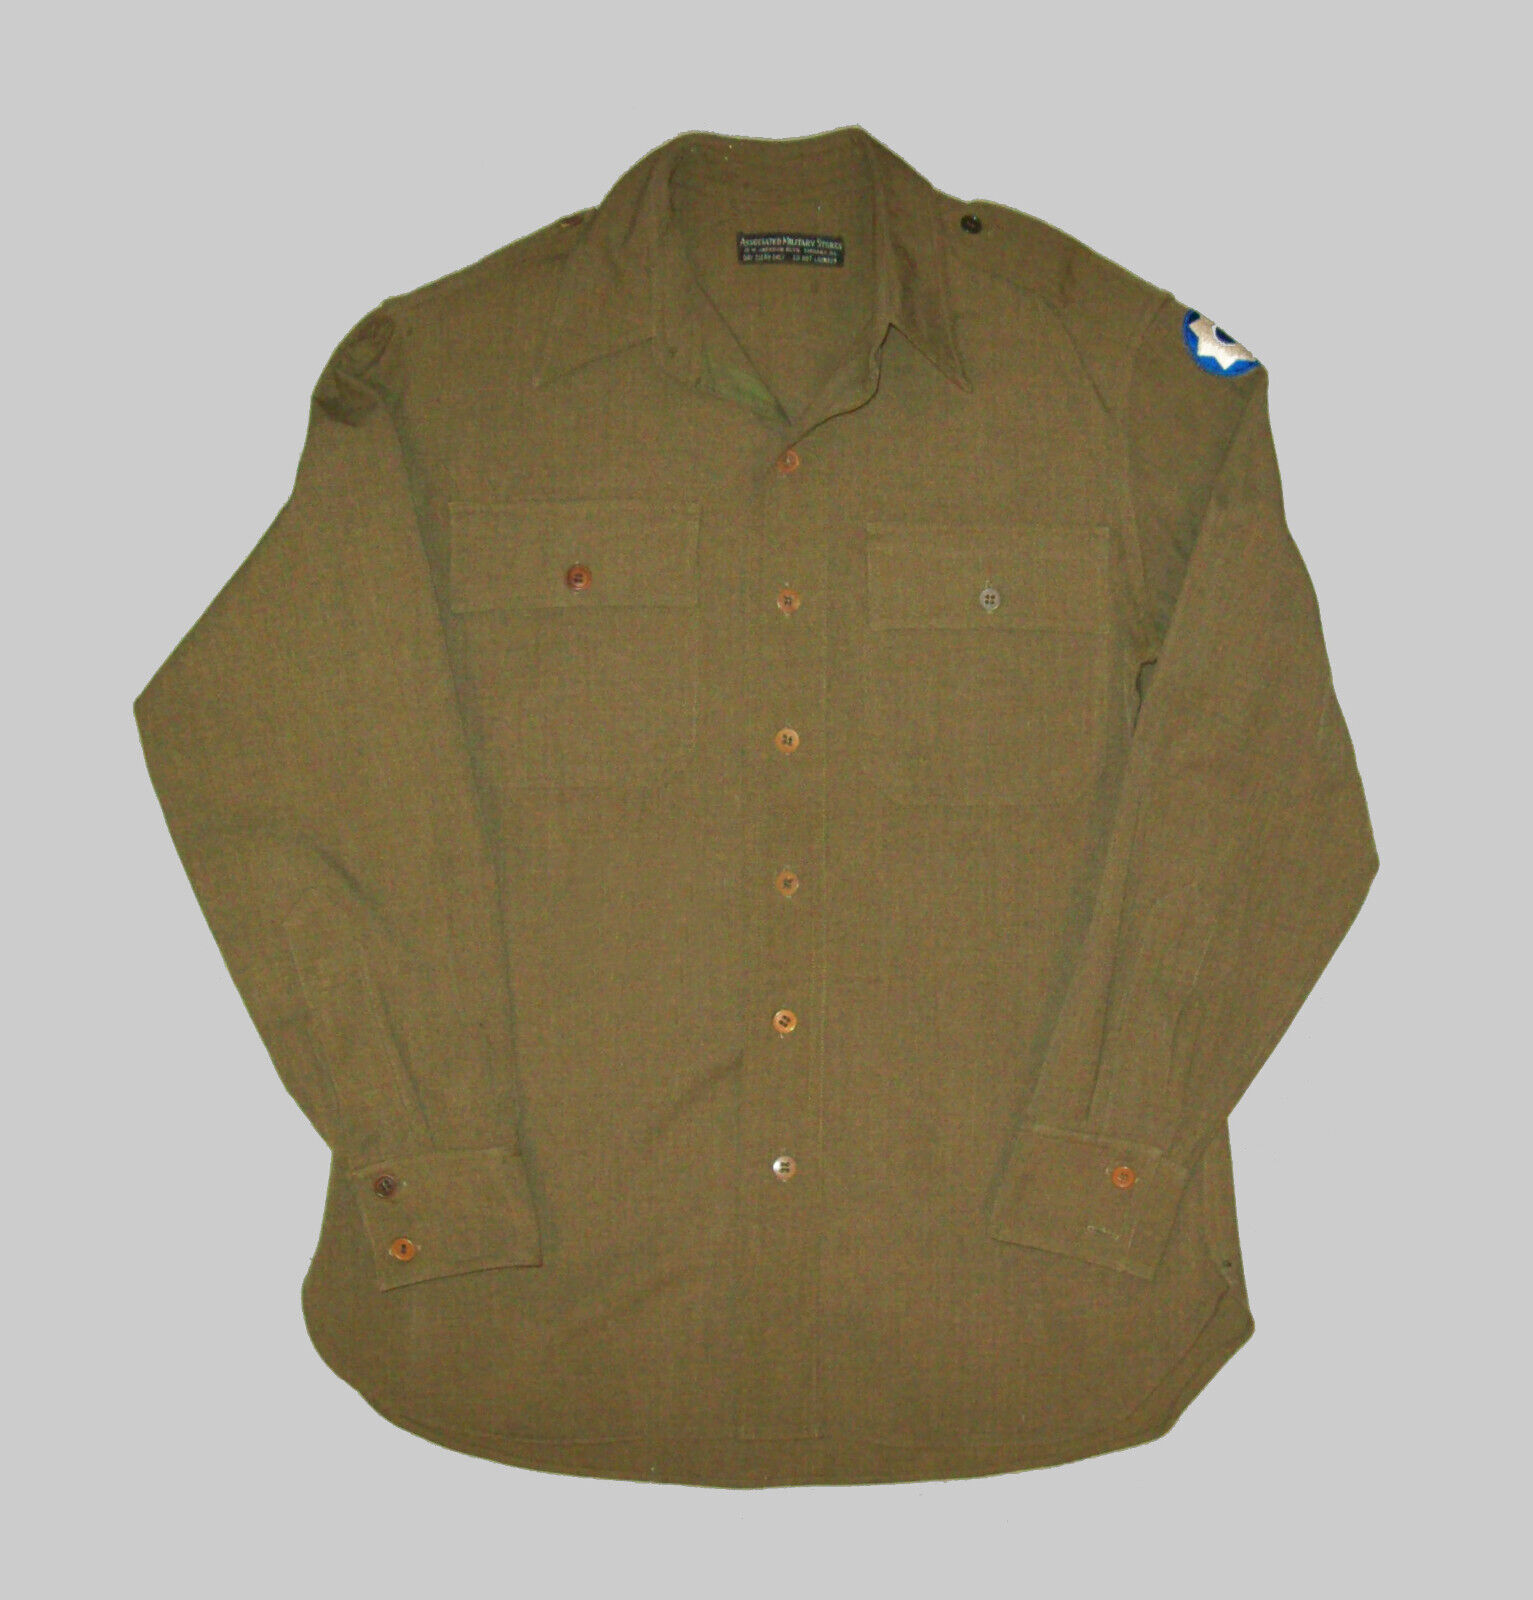 Old Vtg WWII 1940s US Army Shirt Olive Drab Wool With 8th Service Command Patch